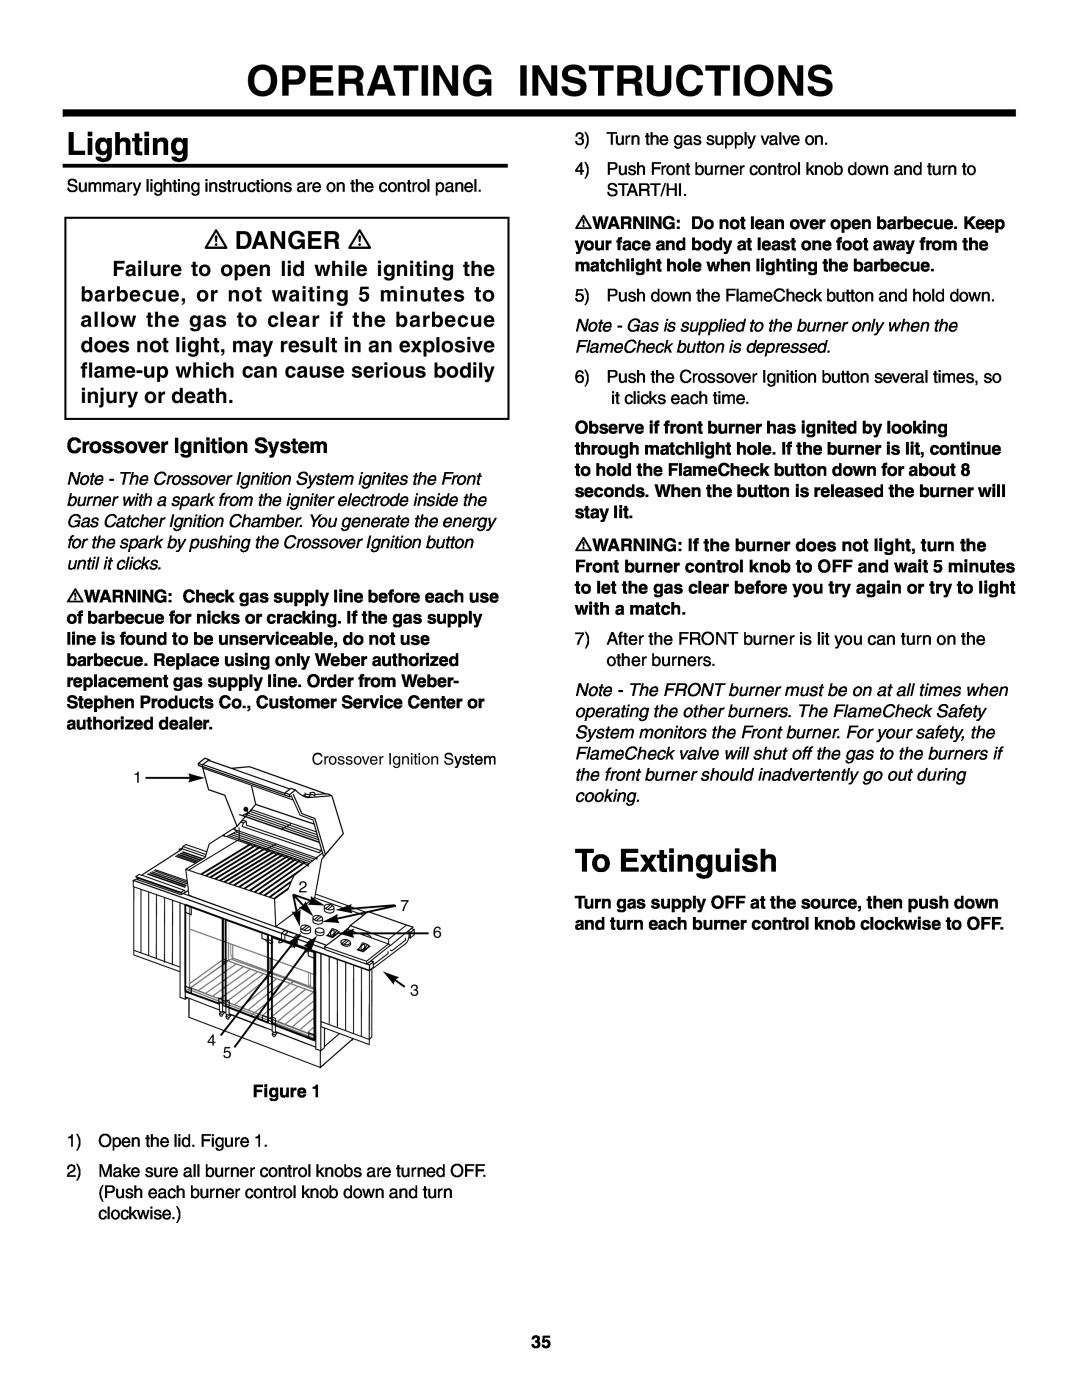 Weber 5500 owner manual Operating Instructions, Lighting, To Extinguish, Danger, Crossover Ignition System 